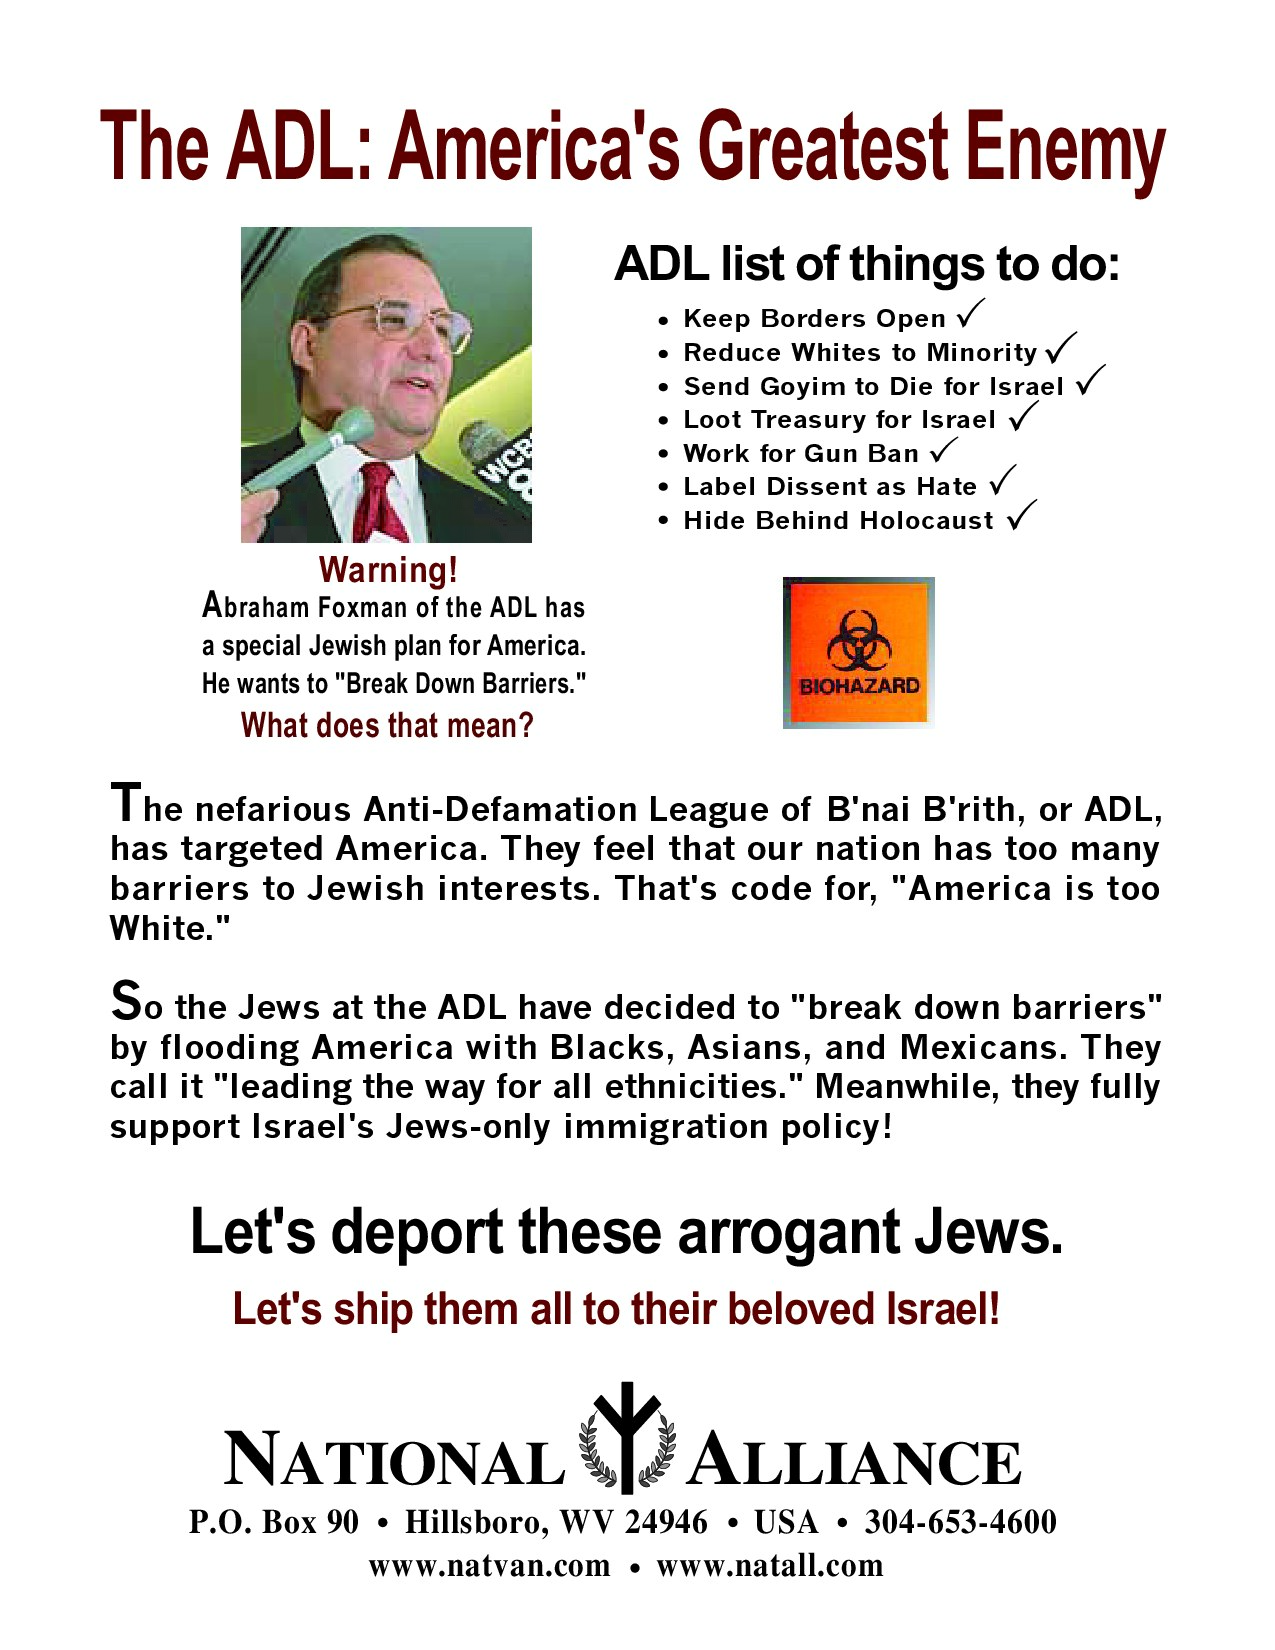 National Alliance; ADL - The World's Greatest Enemy